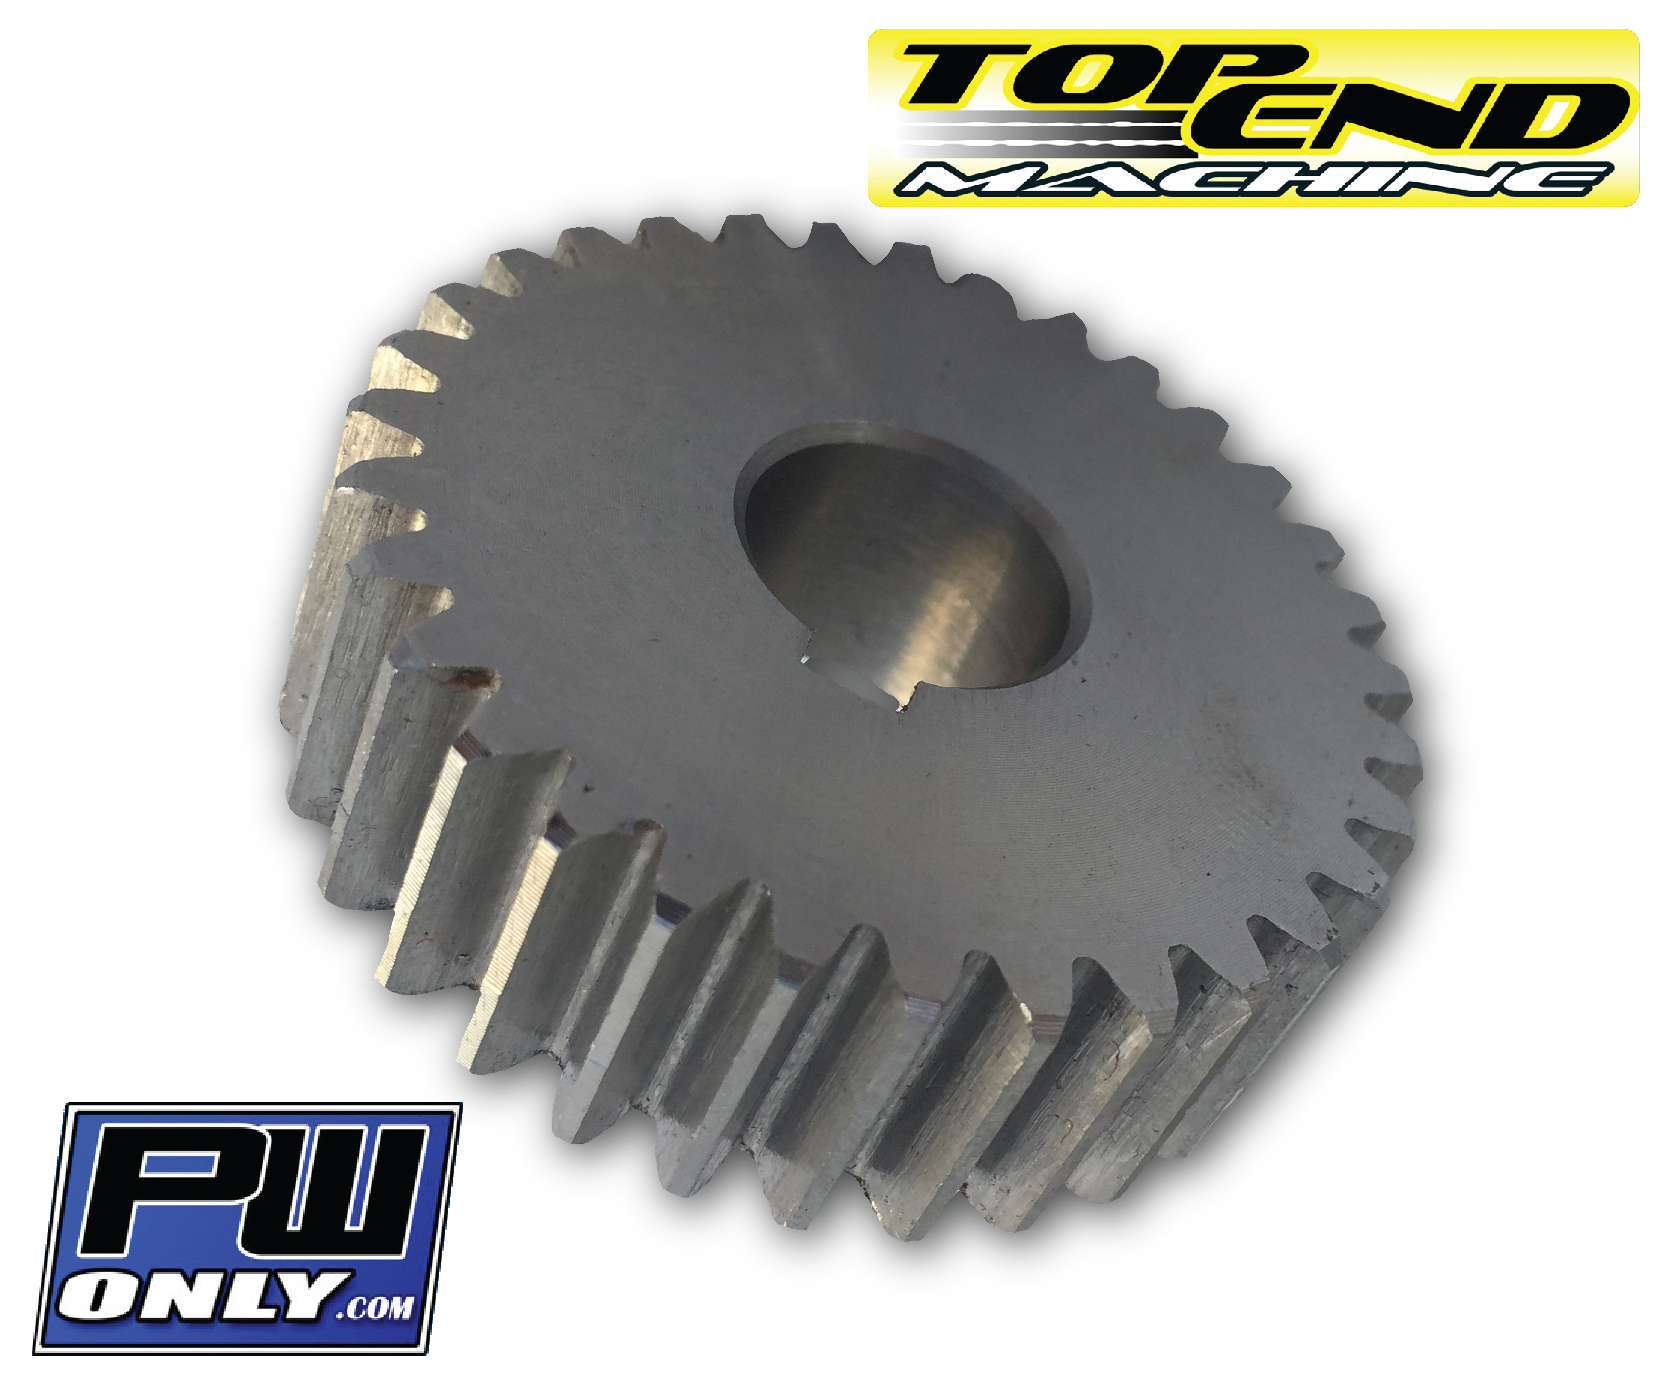 Pw50 High Performance Transmission Gear Pwonly